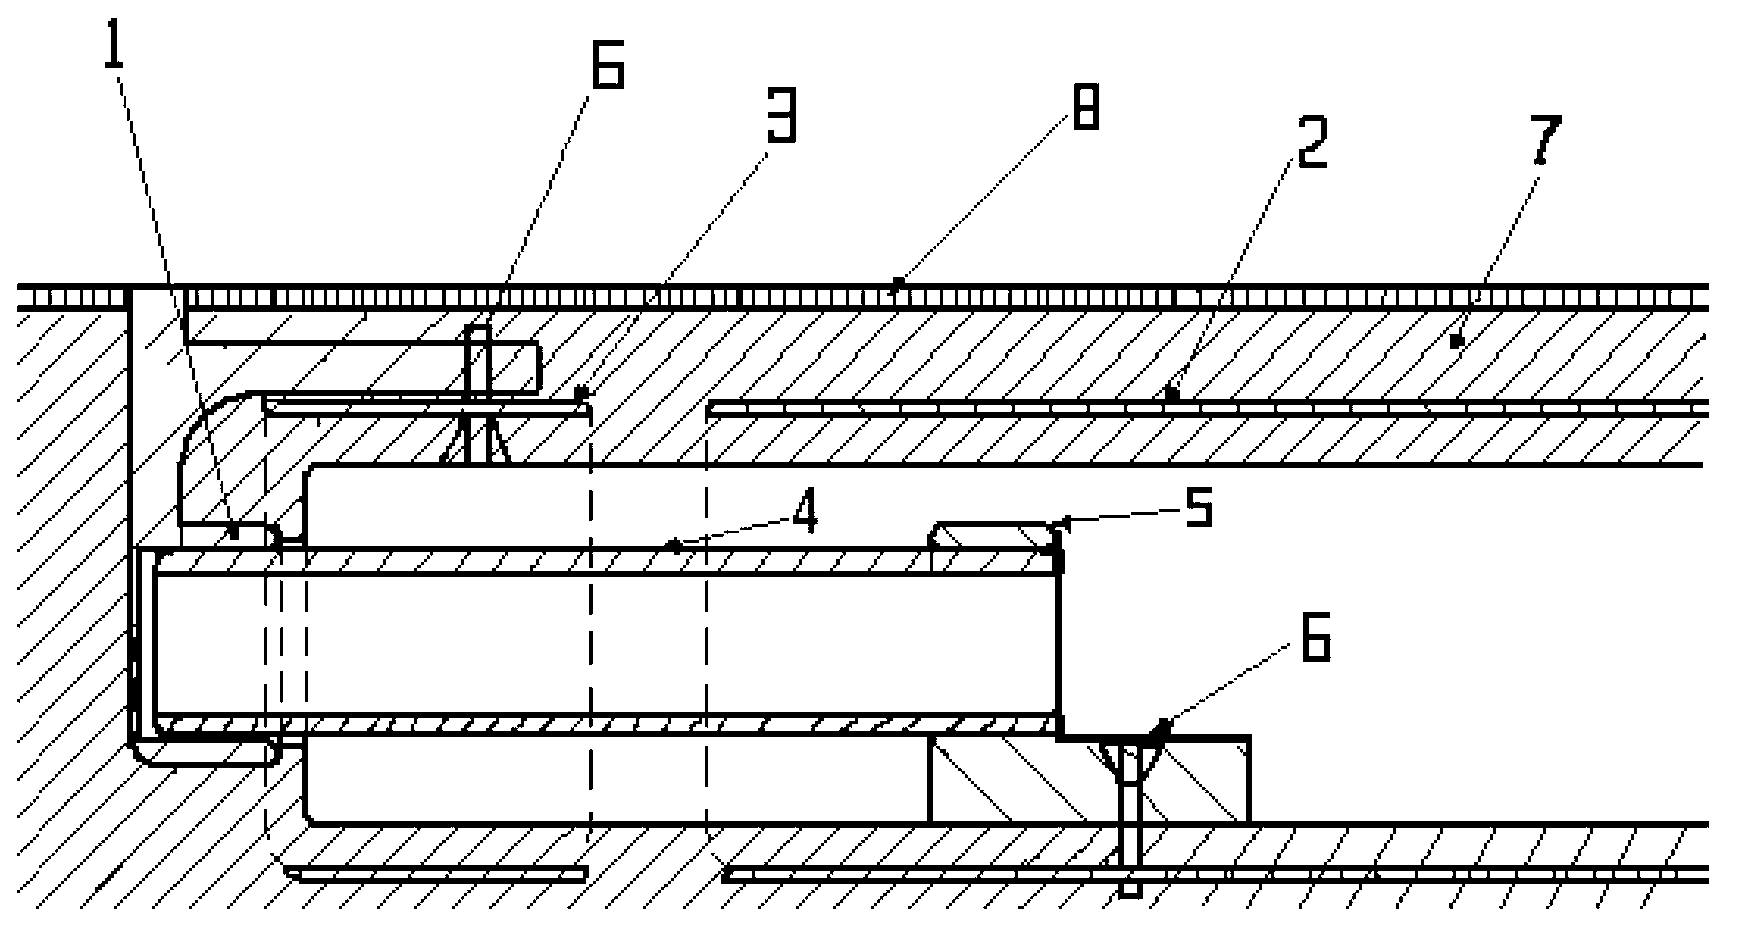 Contact double-shielding structure